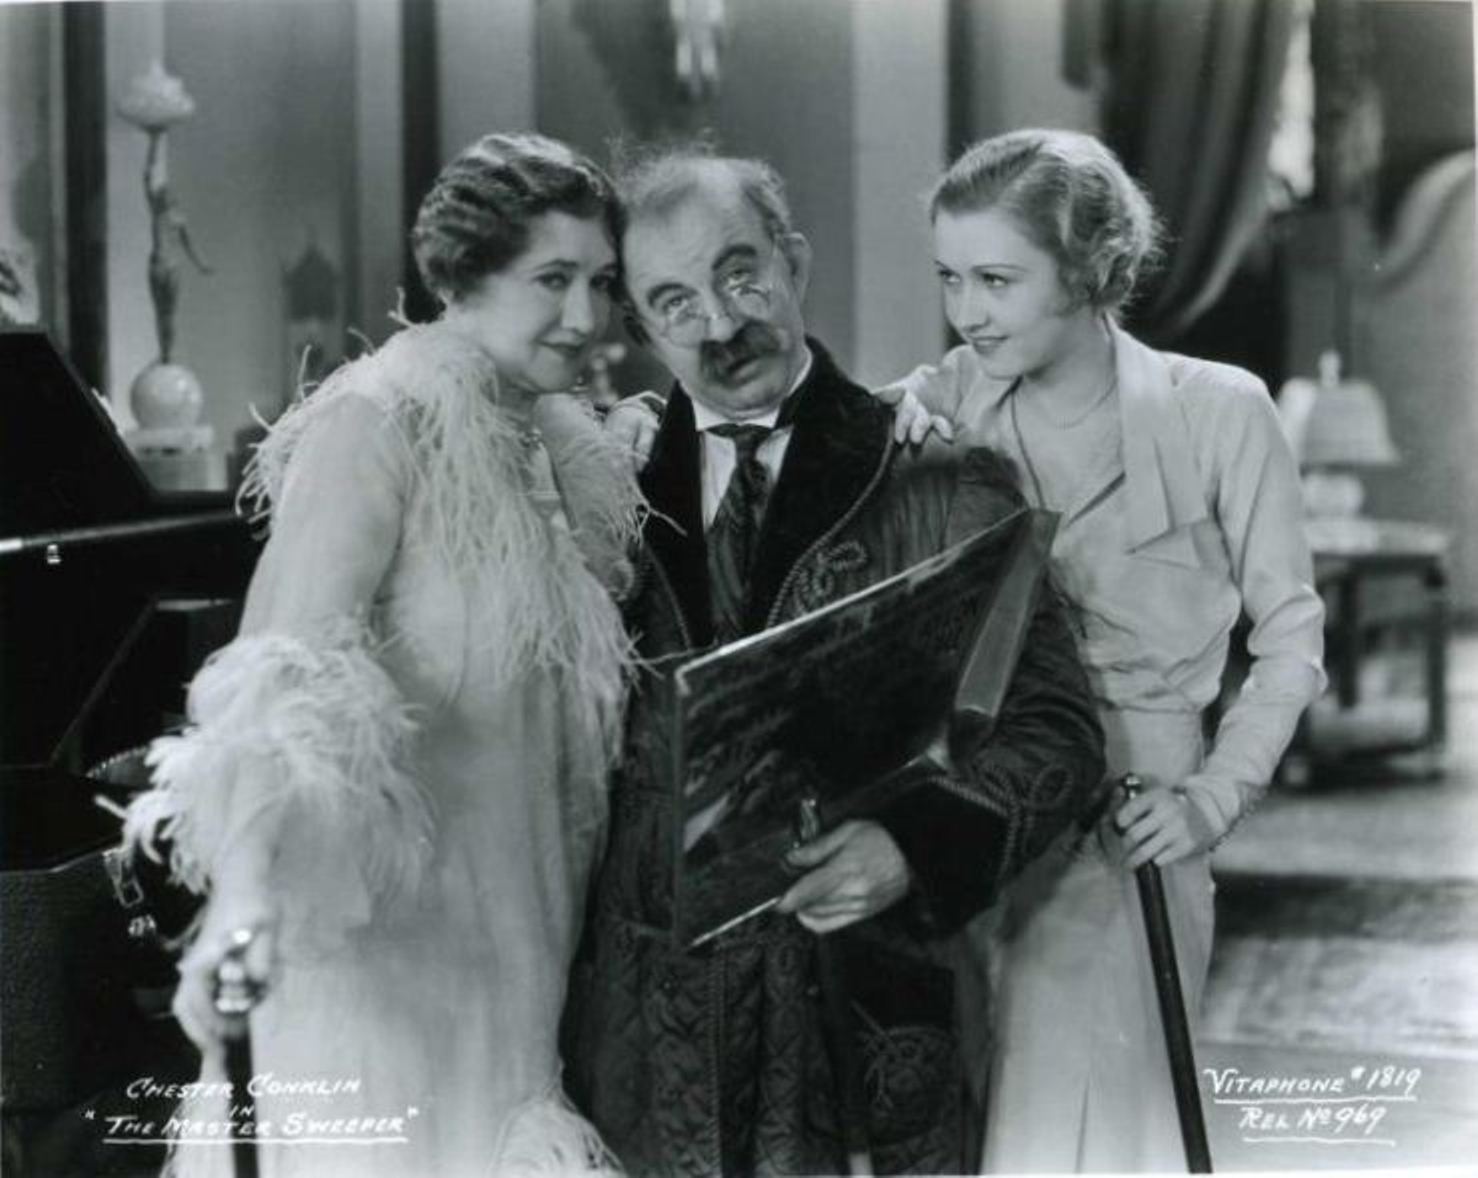 Chester Conklin in The Master Sweeper